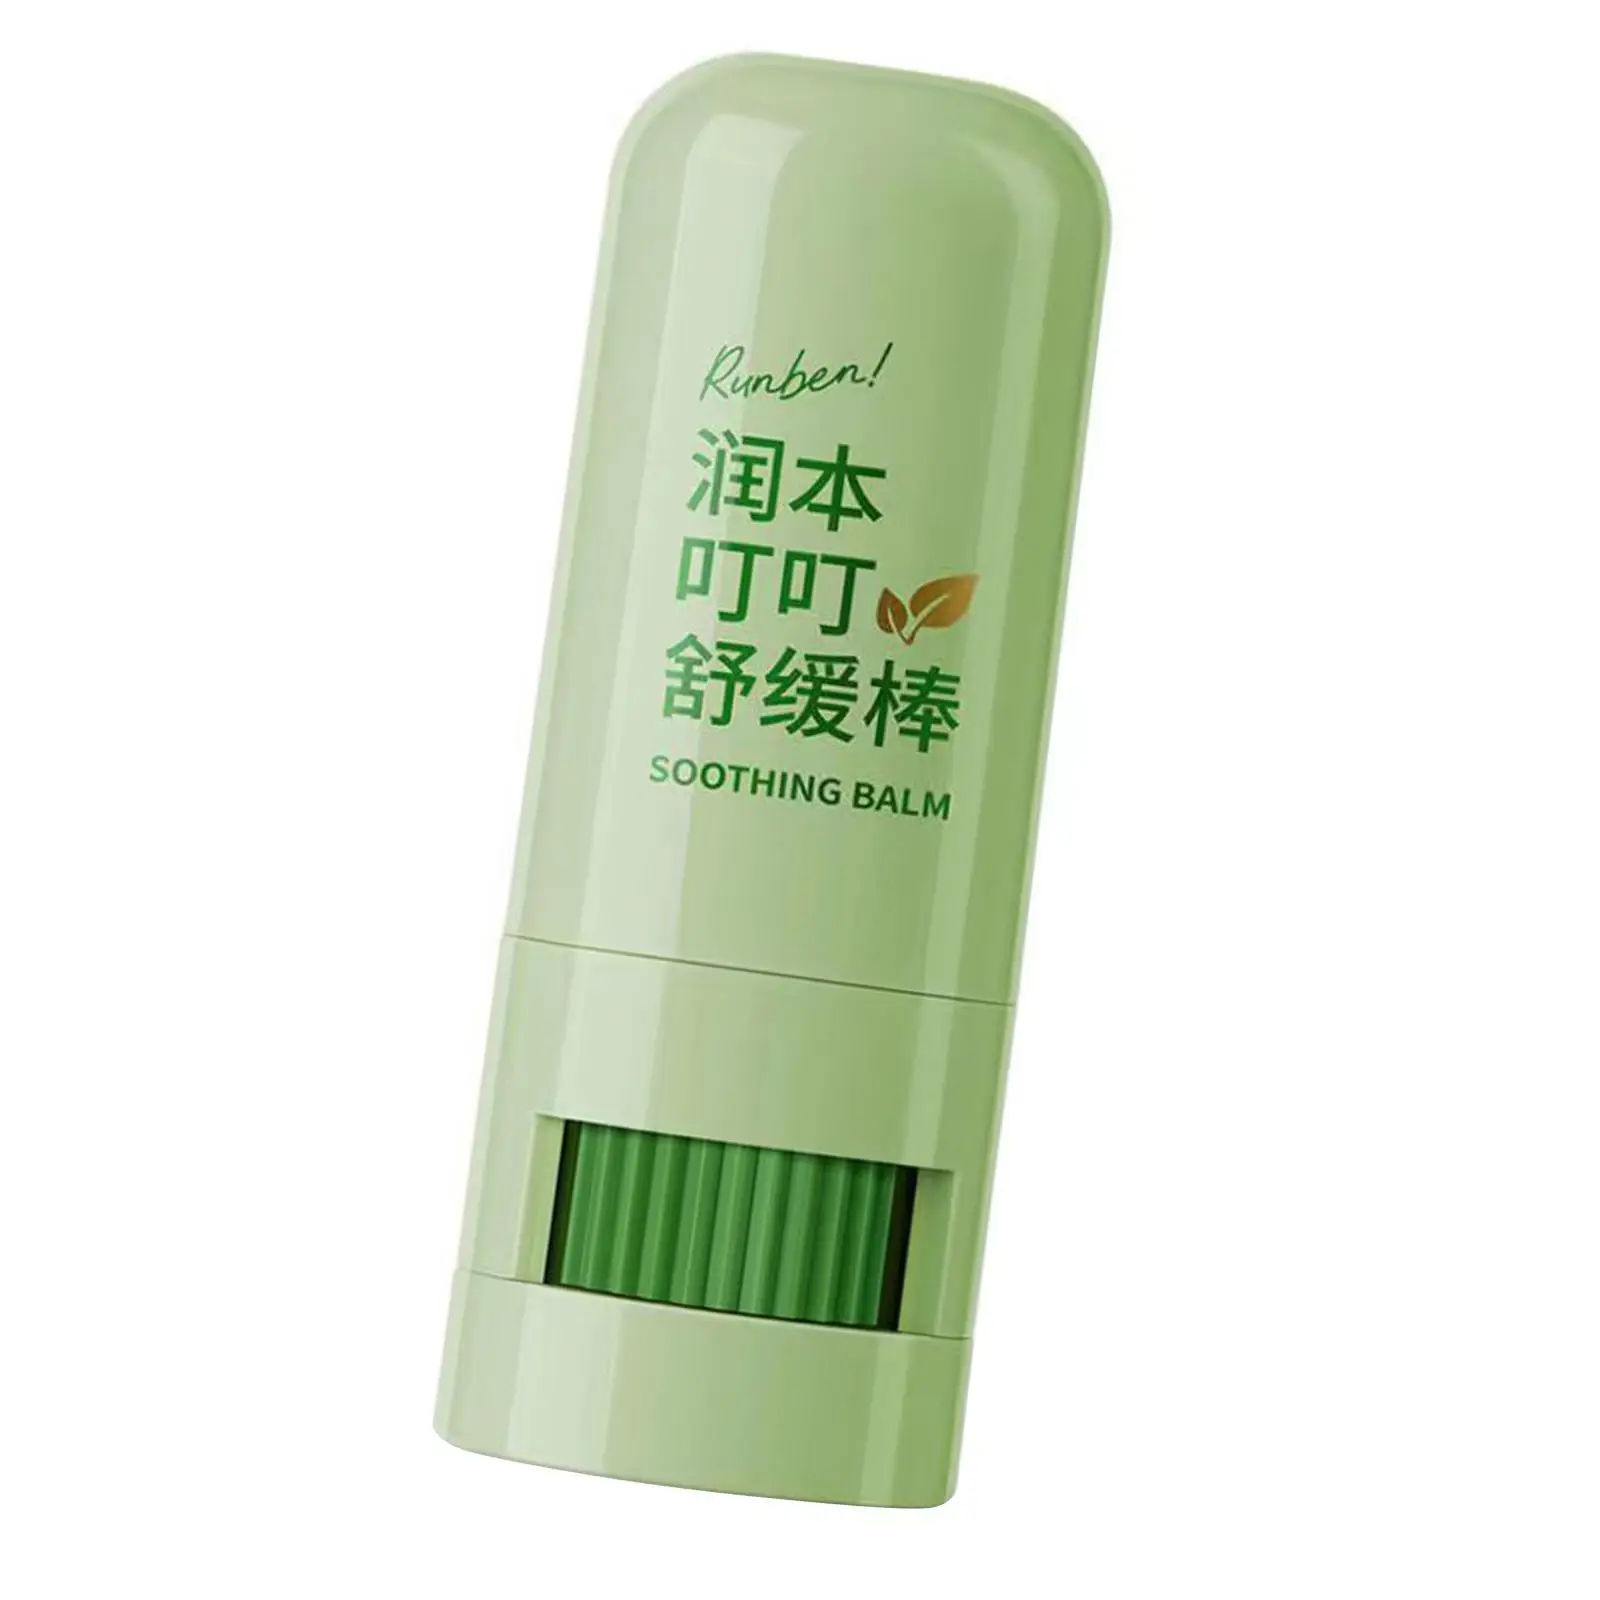 Multifunctional Bites Soothing Stick 7G for Sleeping Travel Playing Outdoors